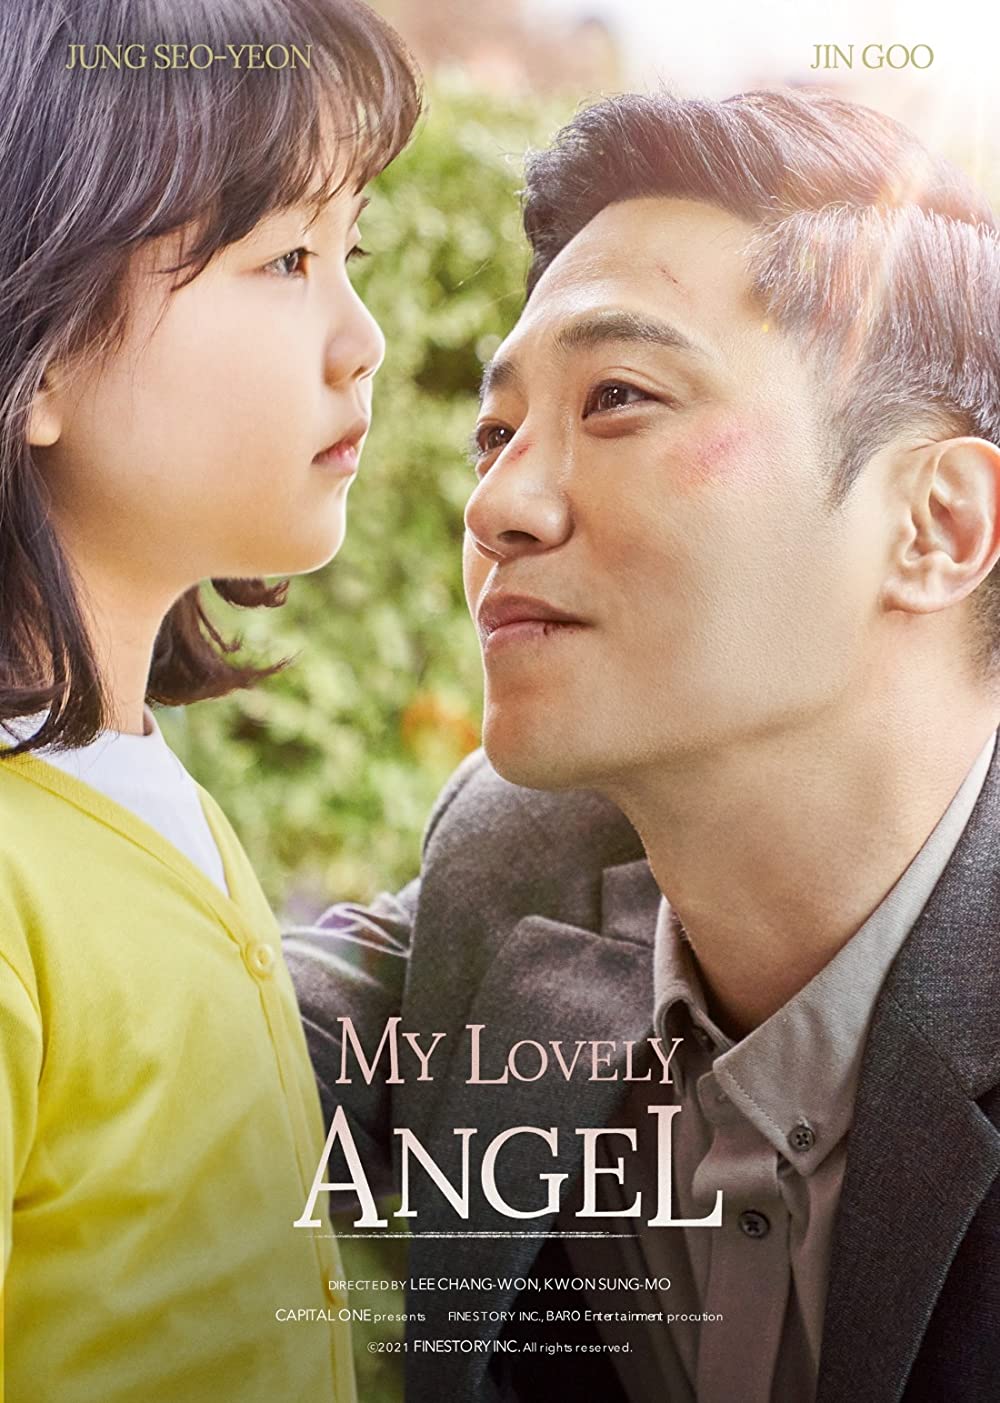 TVN MOVIES - MY LOVELY ANGEL